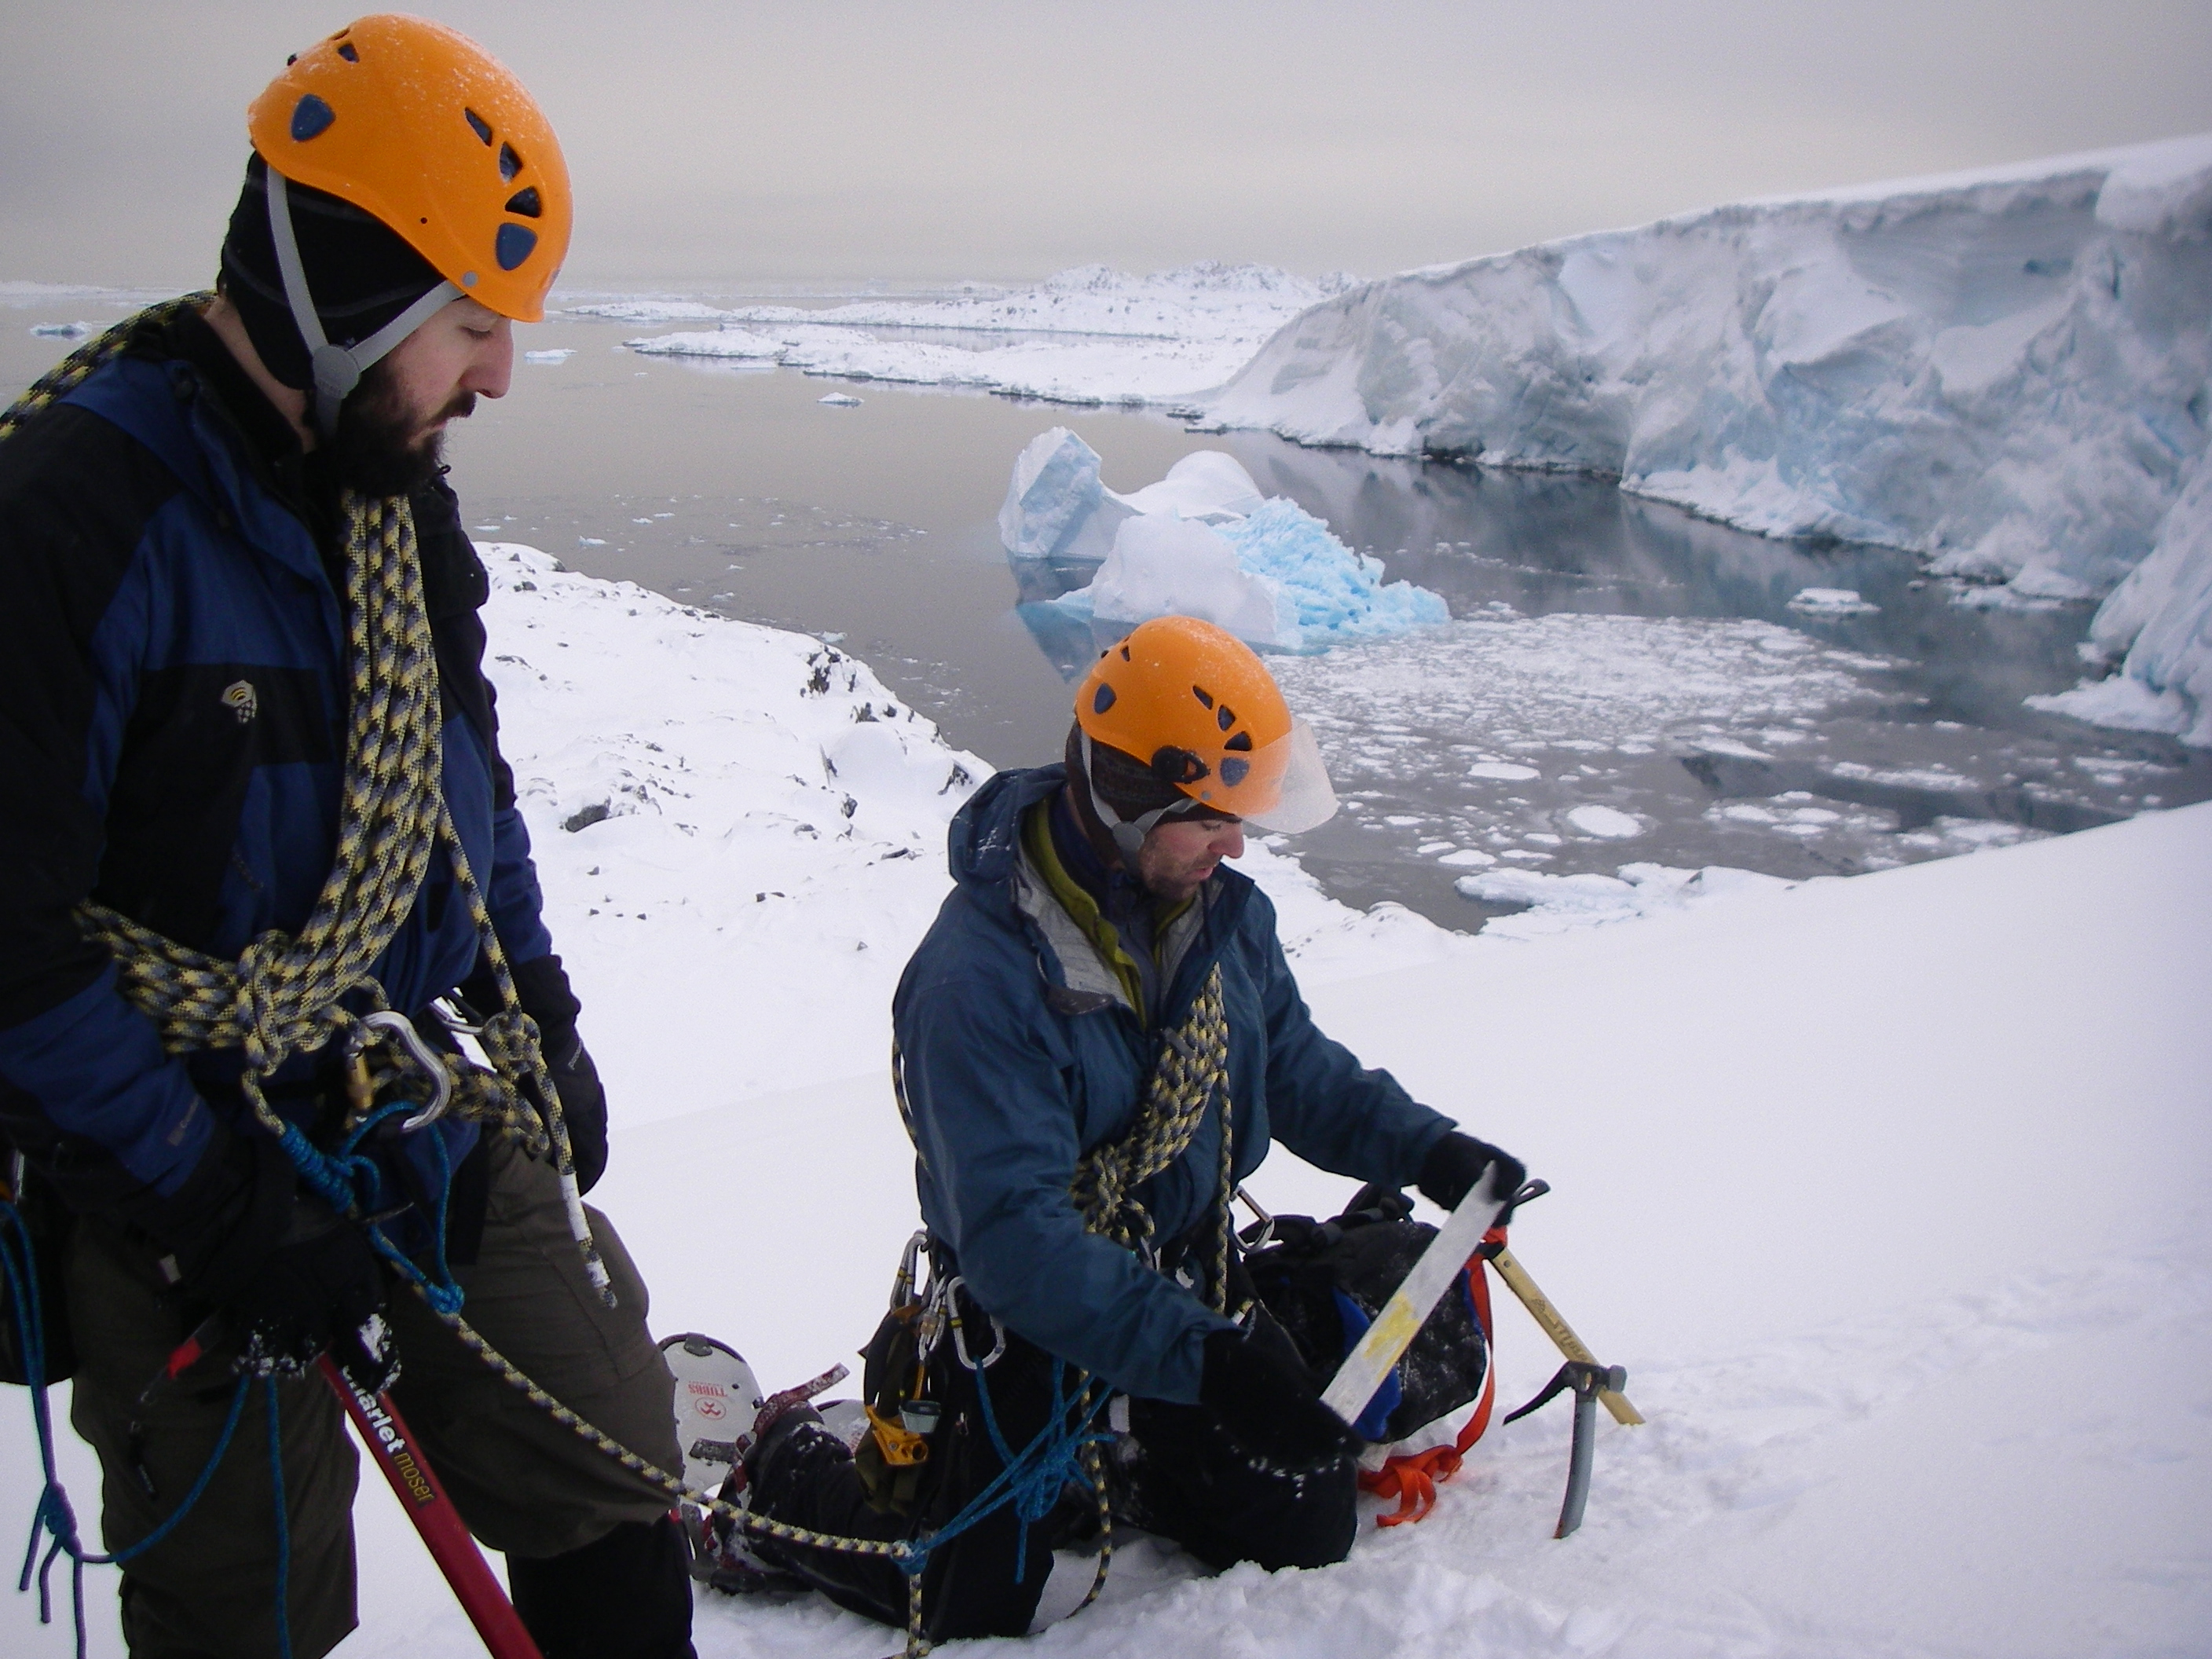 Two men with climbing gear on snow.